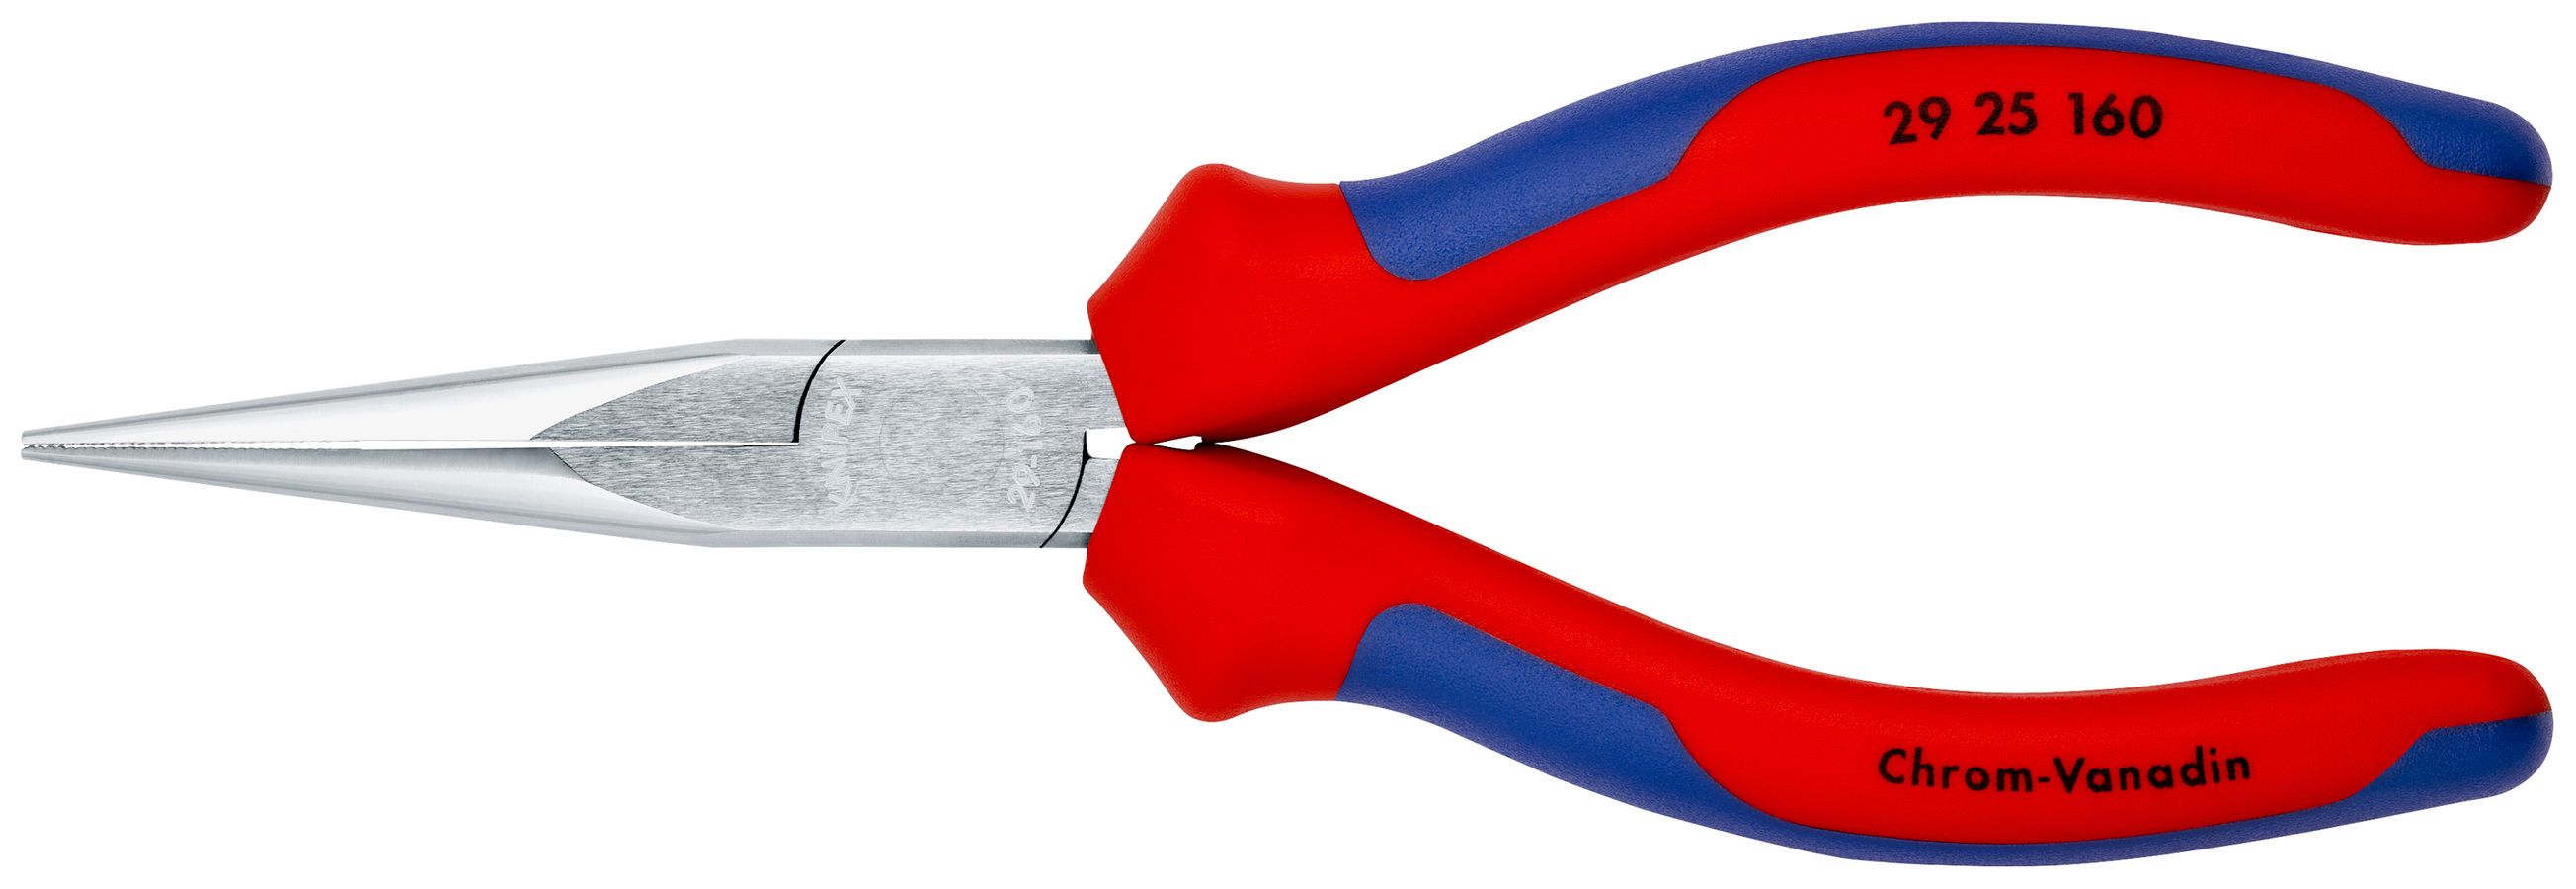 Knipex Long Nose Plier,6-1/4 L,Smooth 31 15 160, 1 - Harris Teeter